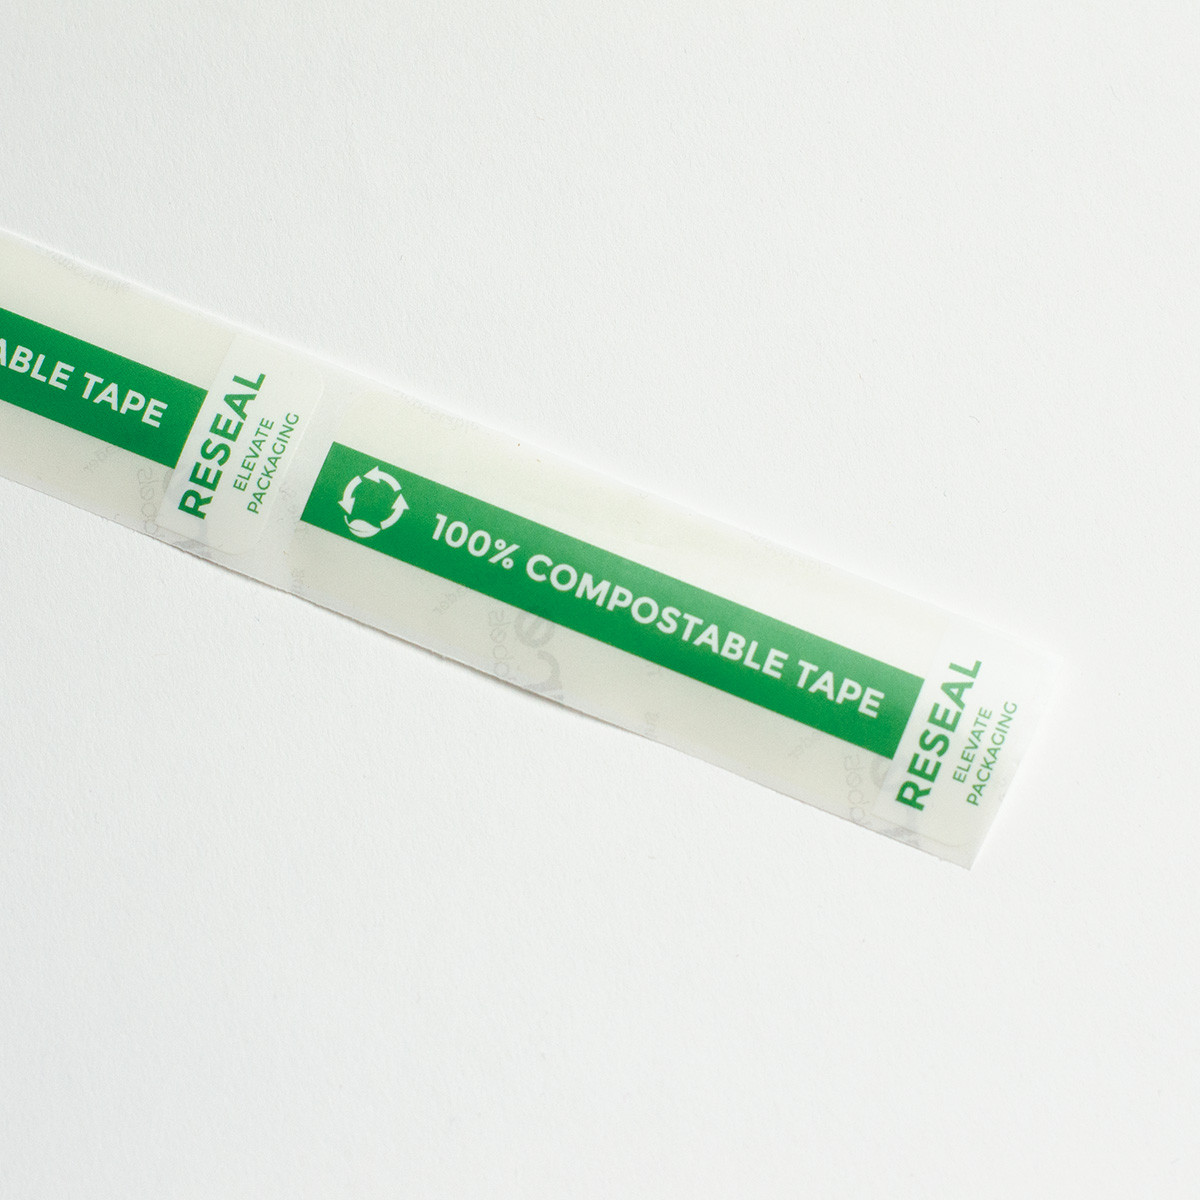 Compostable Shipping Labels - Rolls - Better Packaging Co